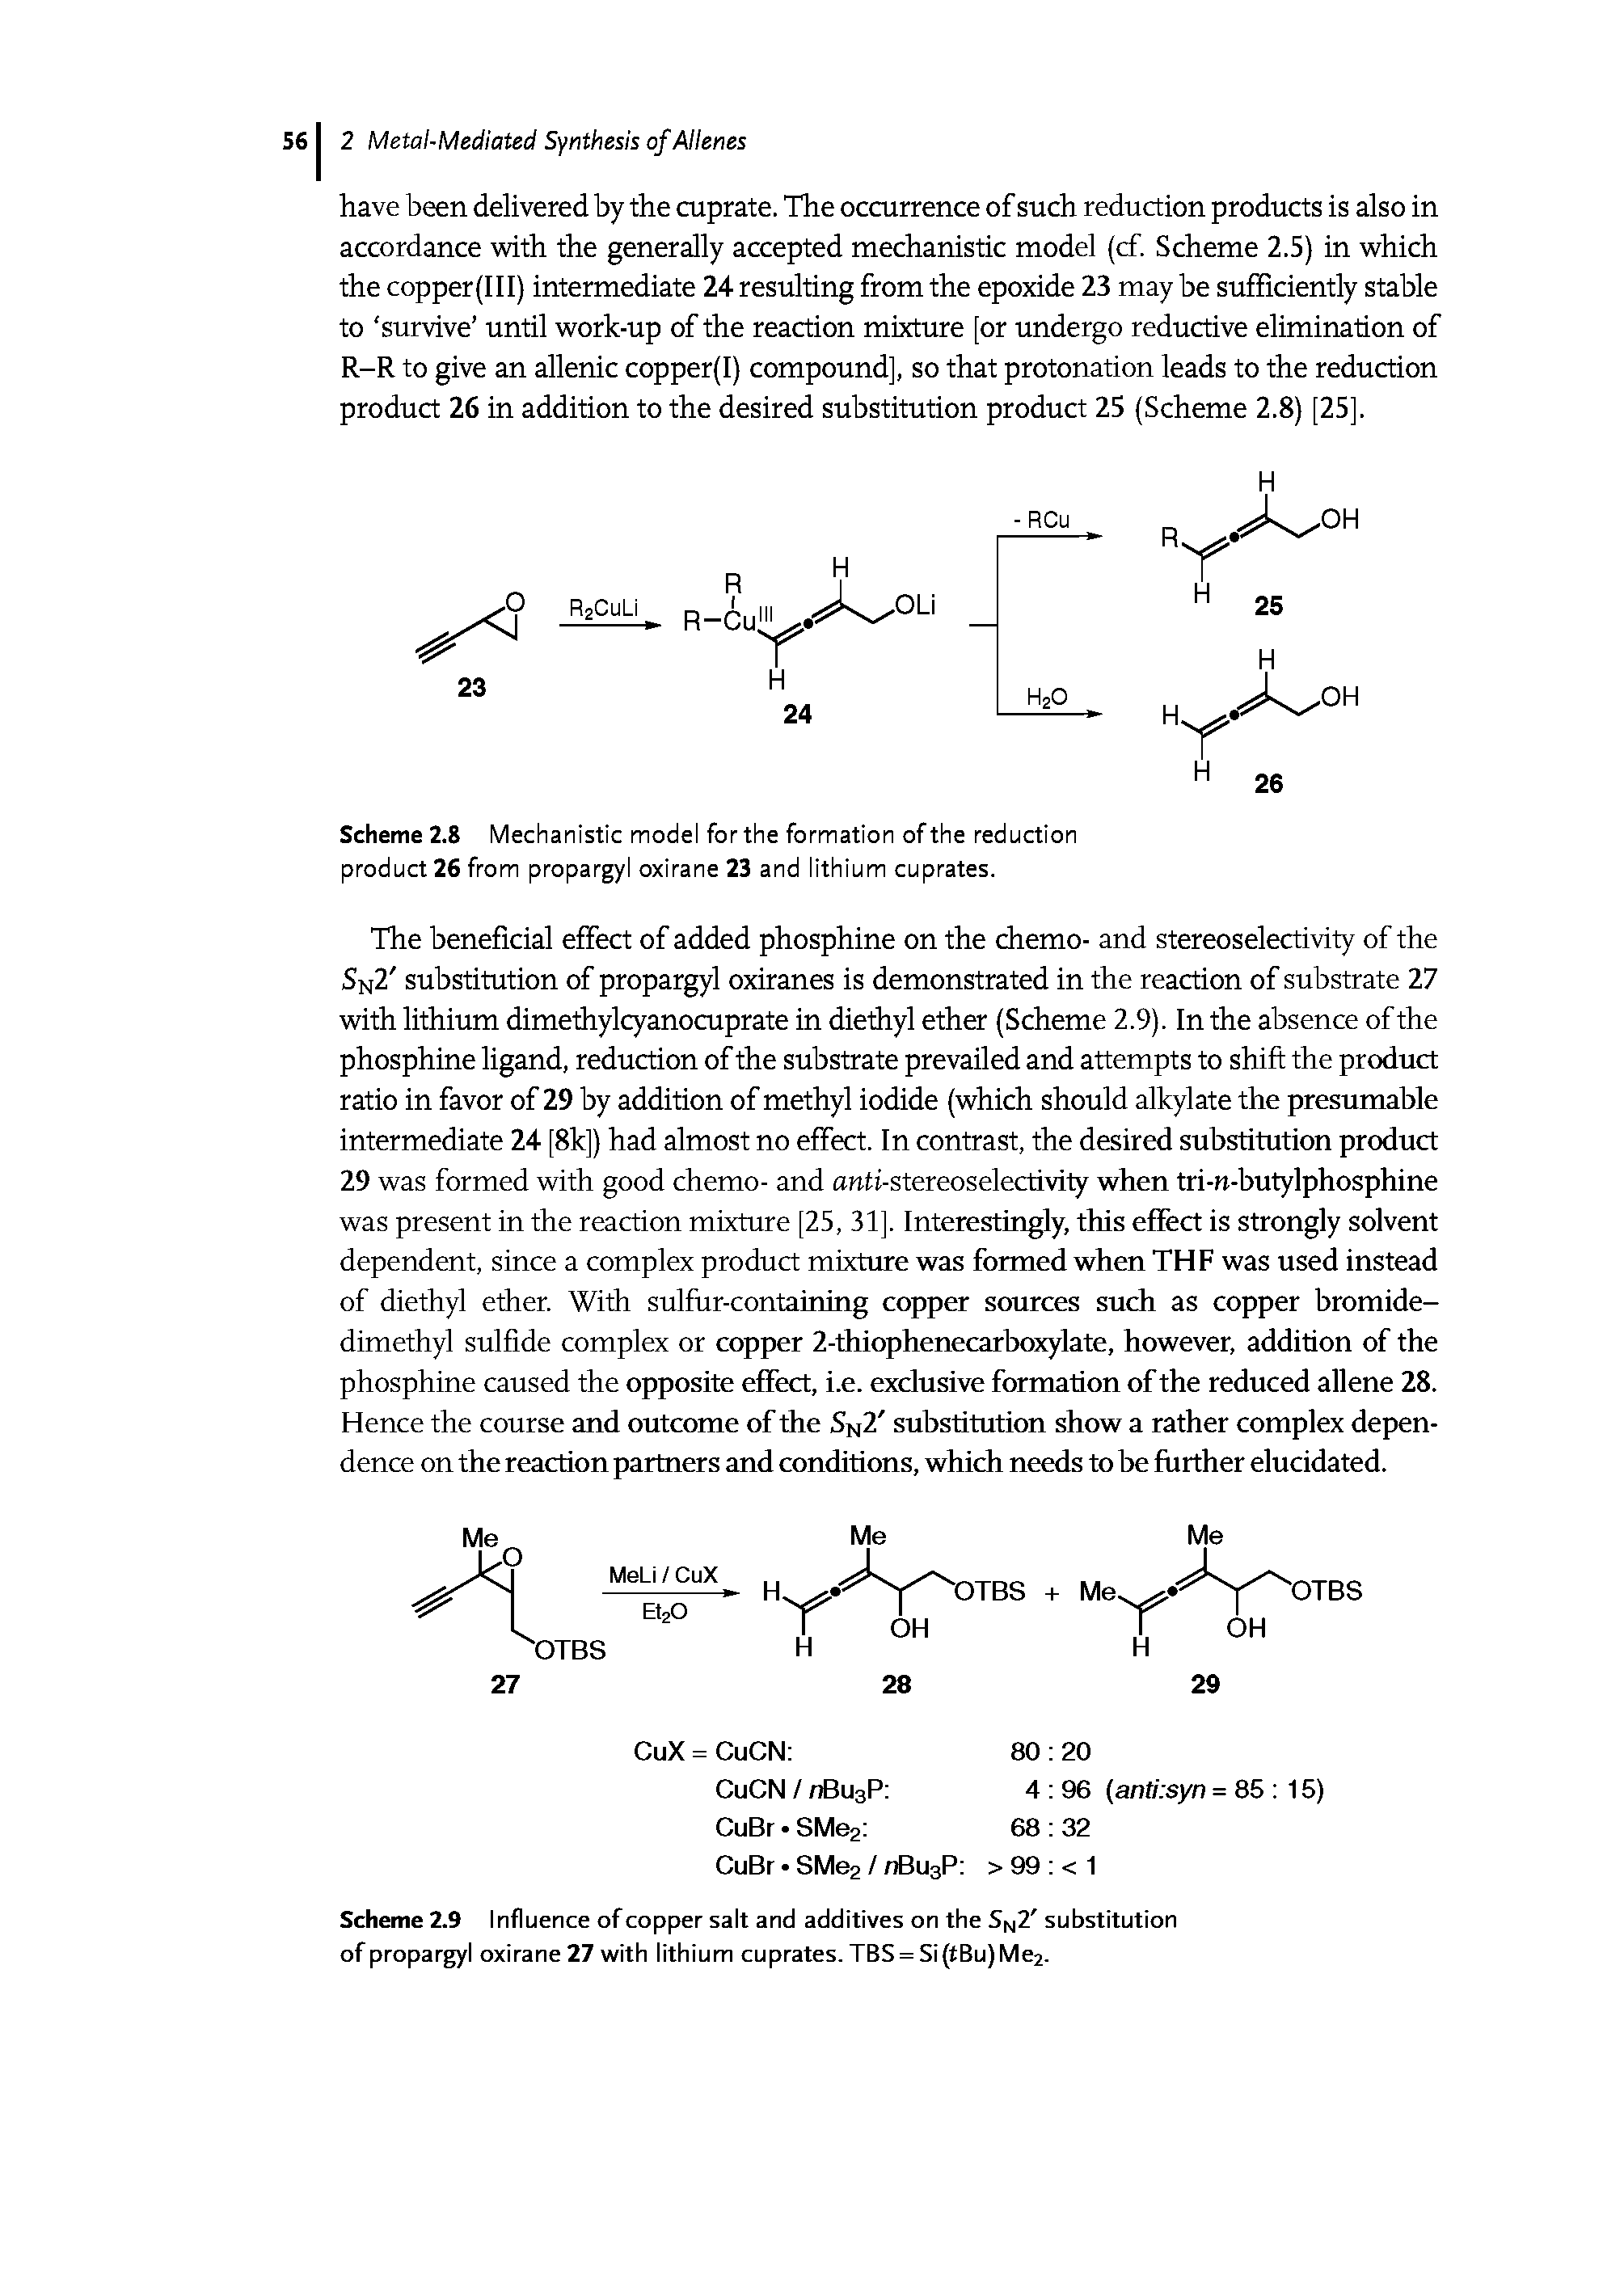 Scheme 2.9 Influence of copper salt and additives on the SN2 substitution of propargyl oxirane 27 with lithium cuprates. TBS = Si(tBu)Me2.